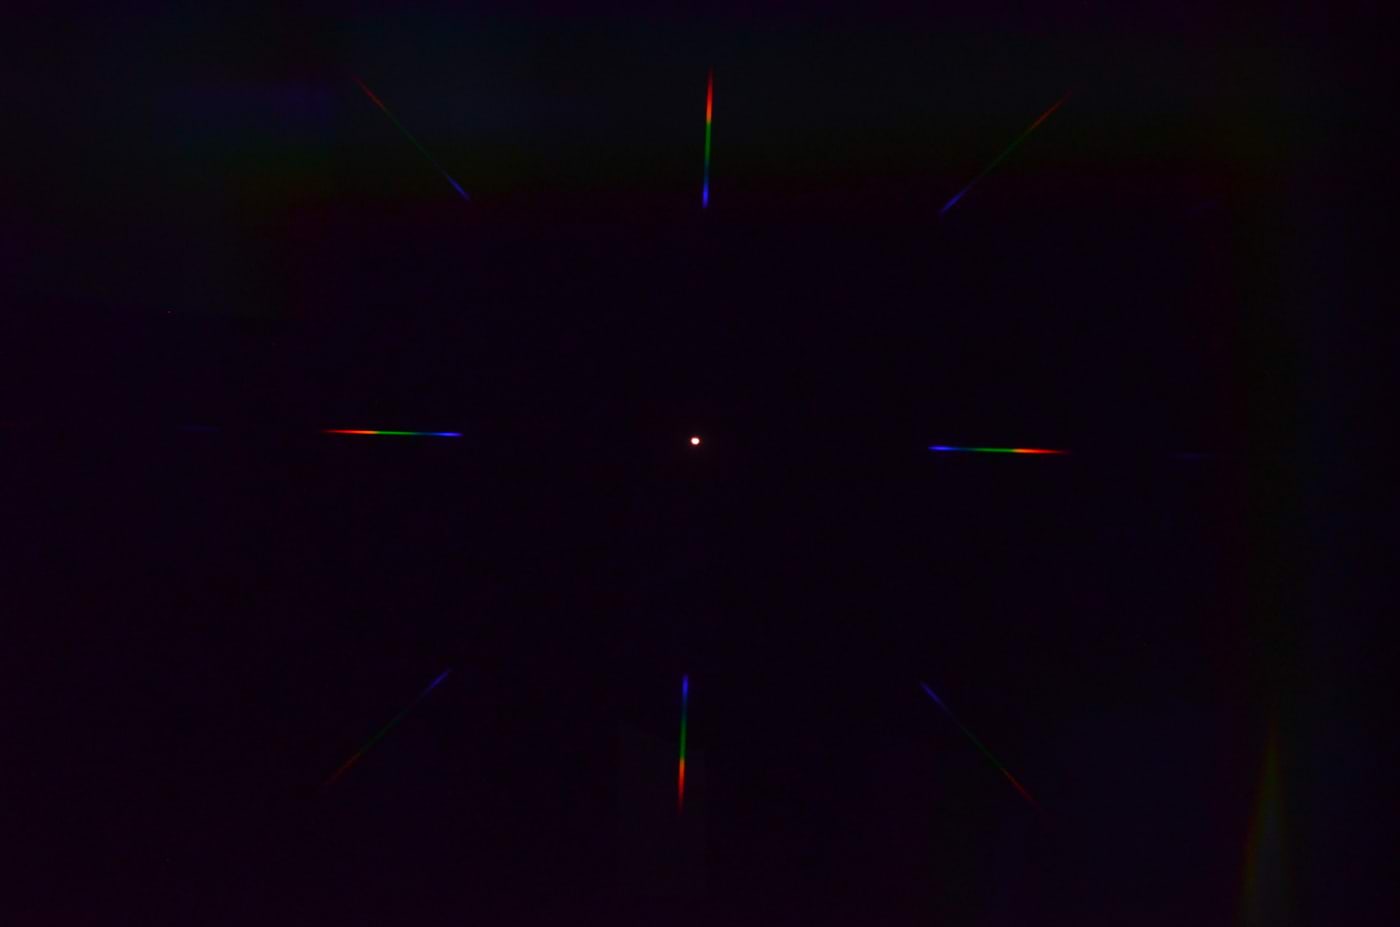 The spectrum of white LED light reflected from the pink paper, seen through the small hole in the rainbow glasses